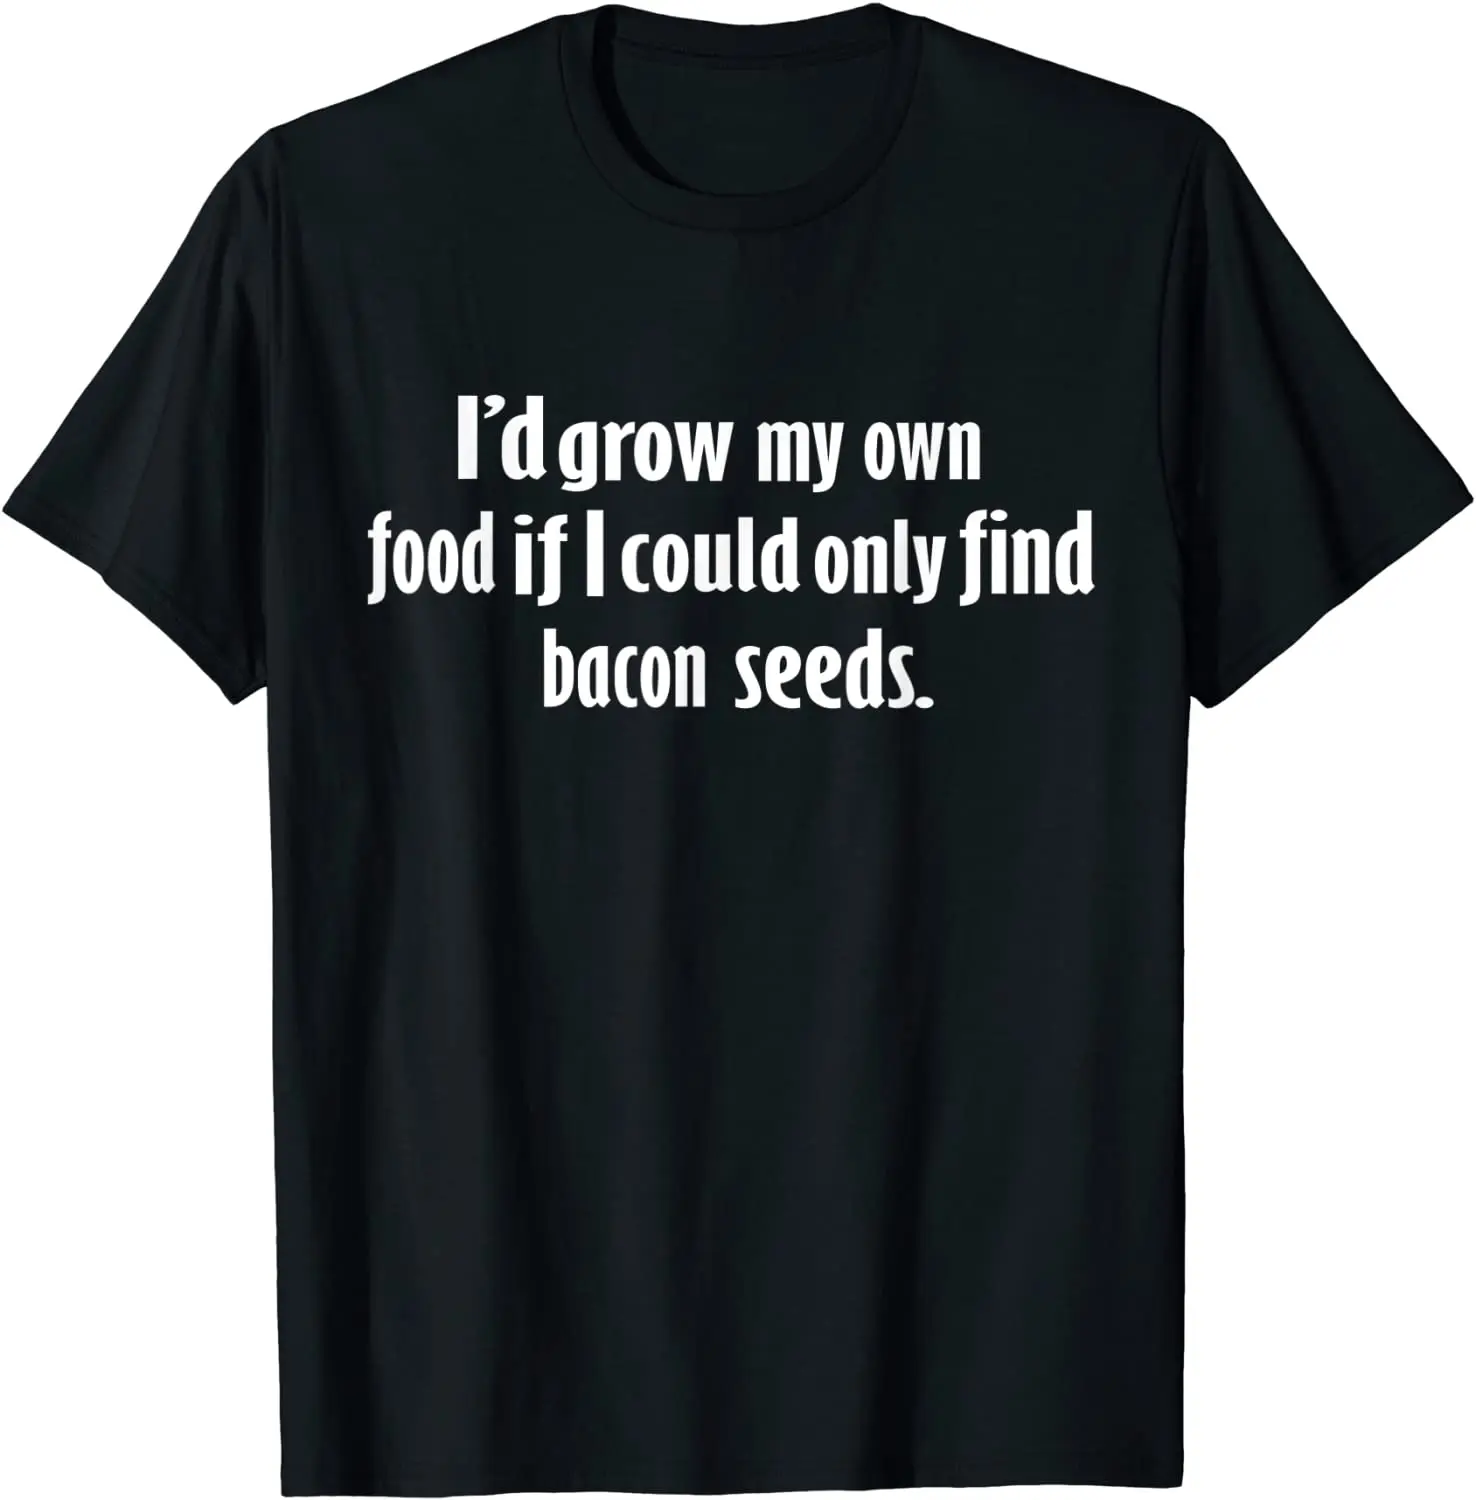 

I'd Grow My Own Food If I Could Find Bacon Seeds T-Shirt Company Casual Top T-shirts Cotton Tops Shirts for Men Custom